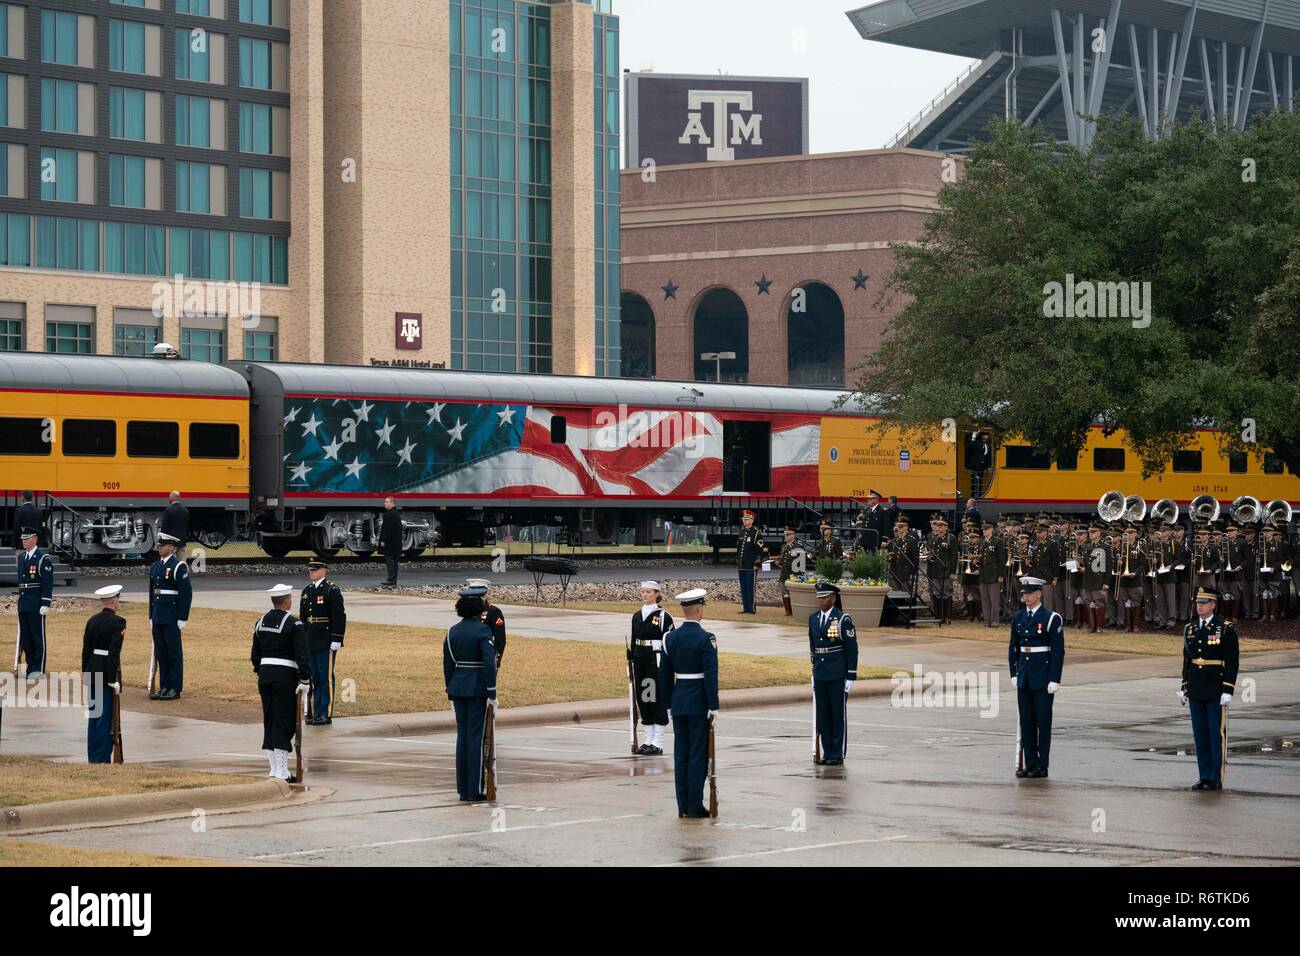 Train carrying the casket of former President George H.W. Bush from Houston arrives at Texas A&M University in College Station for burial at the nearby George Bush Library. Stock Photo